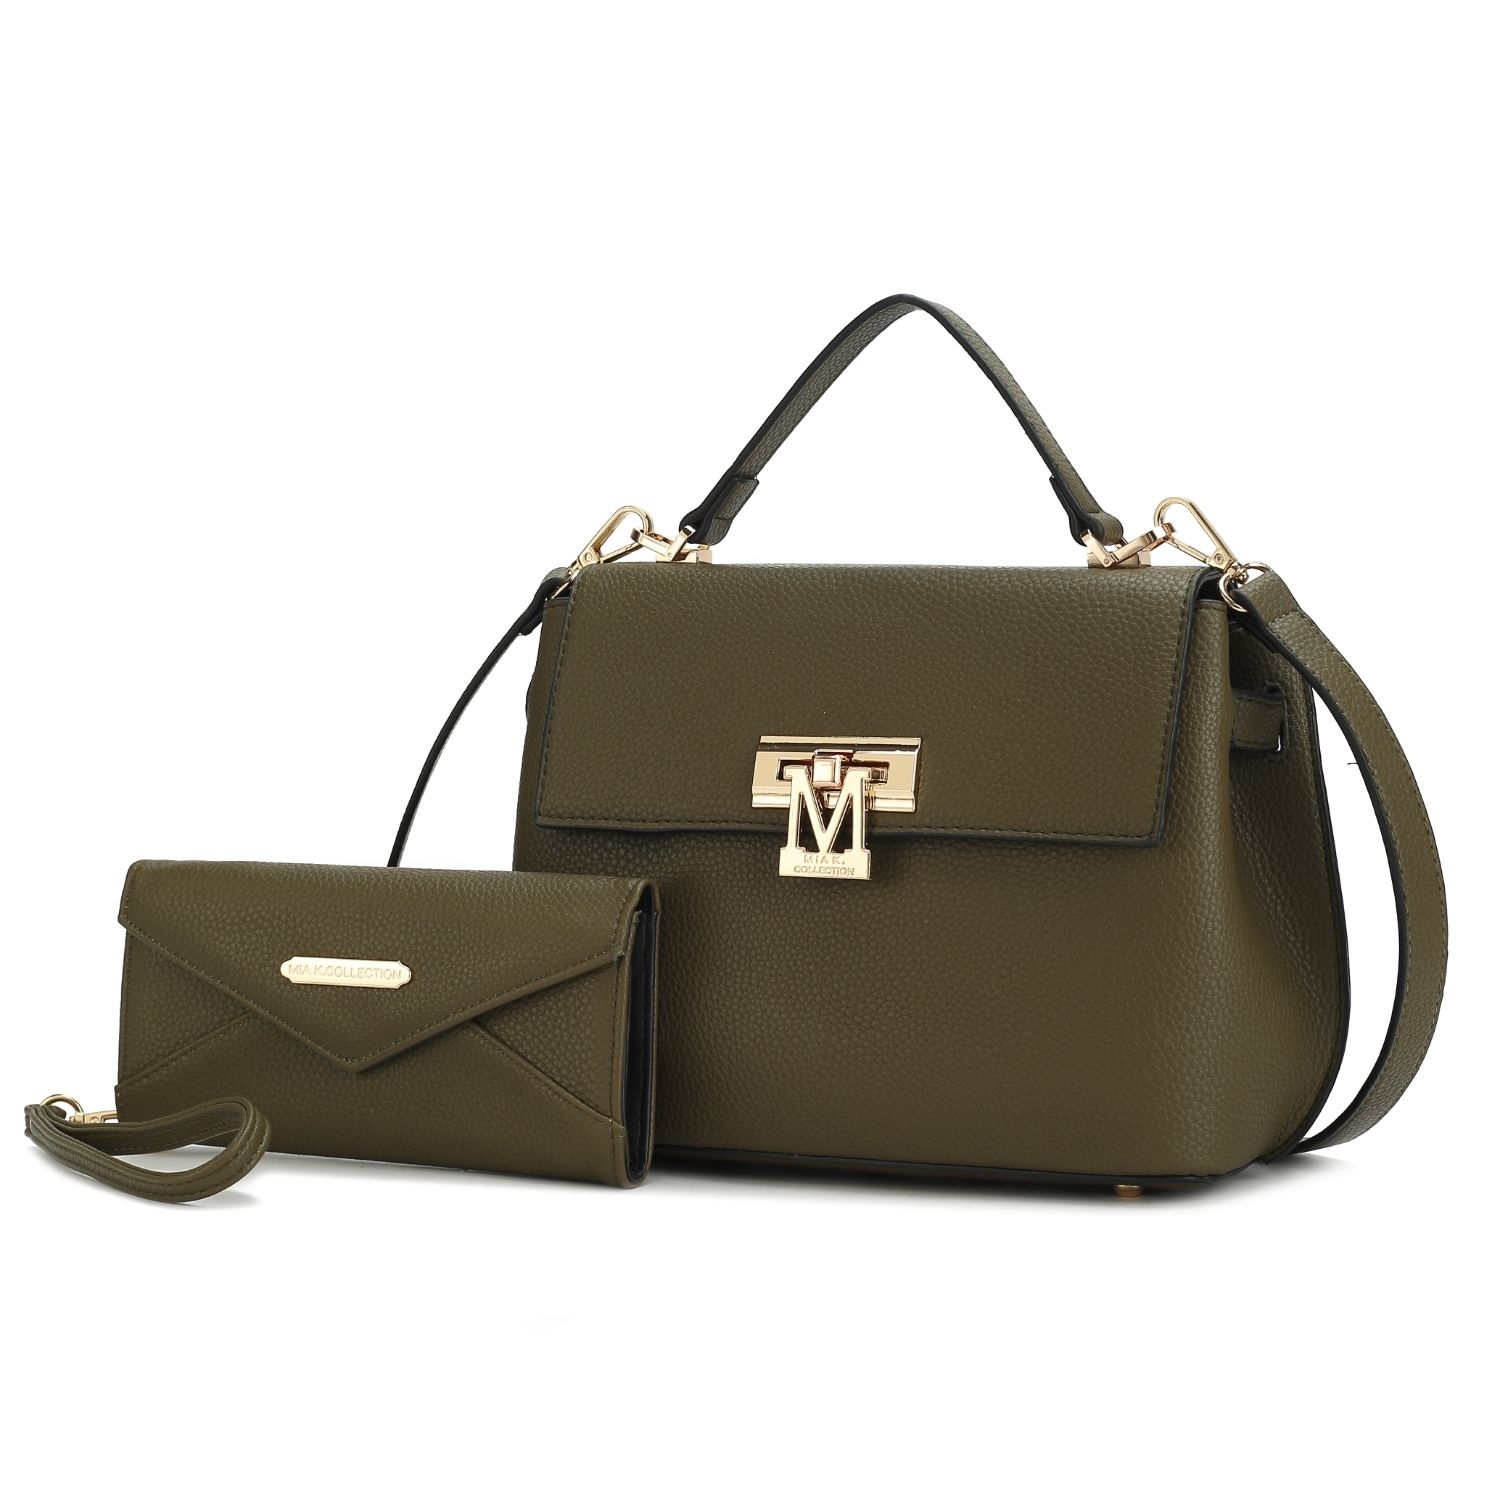 MKF Collection Hadley Vegan Leather Women's Satchel Bag With Wristlet Wallet - 2 Pieces By Mia K - Olive